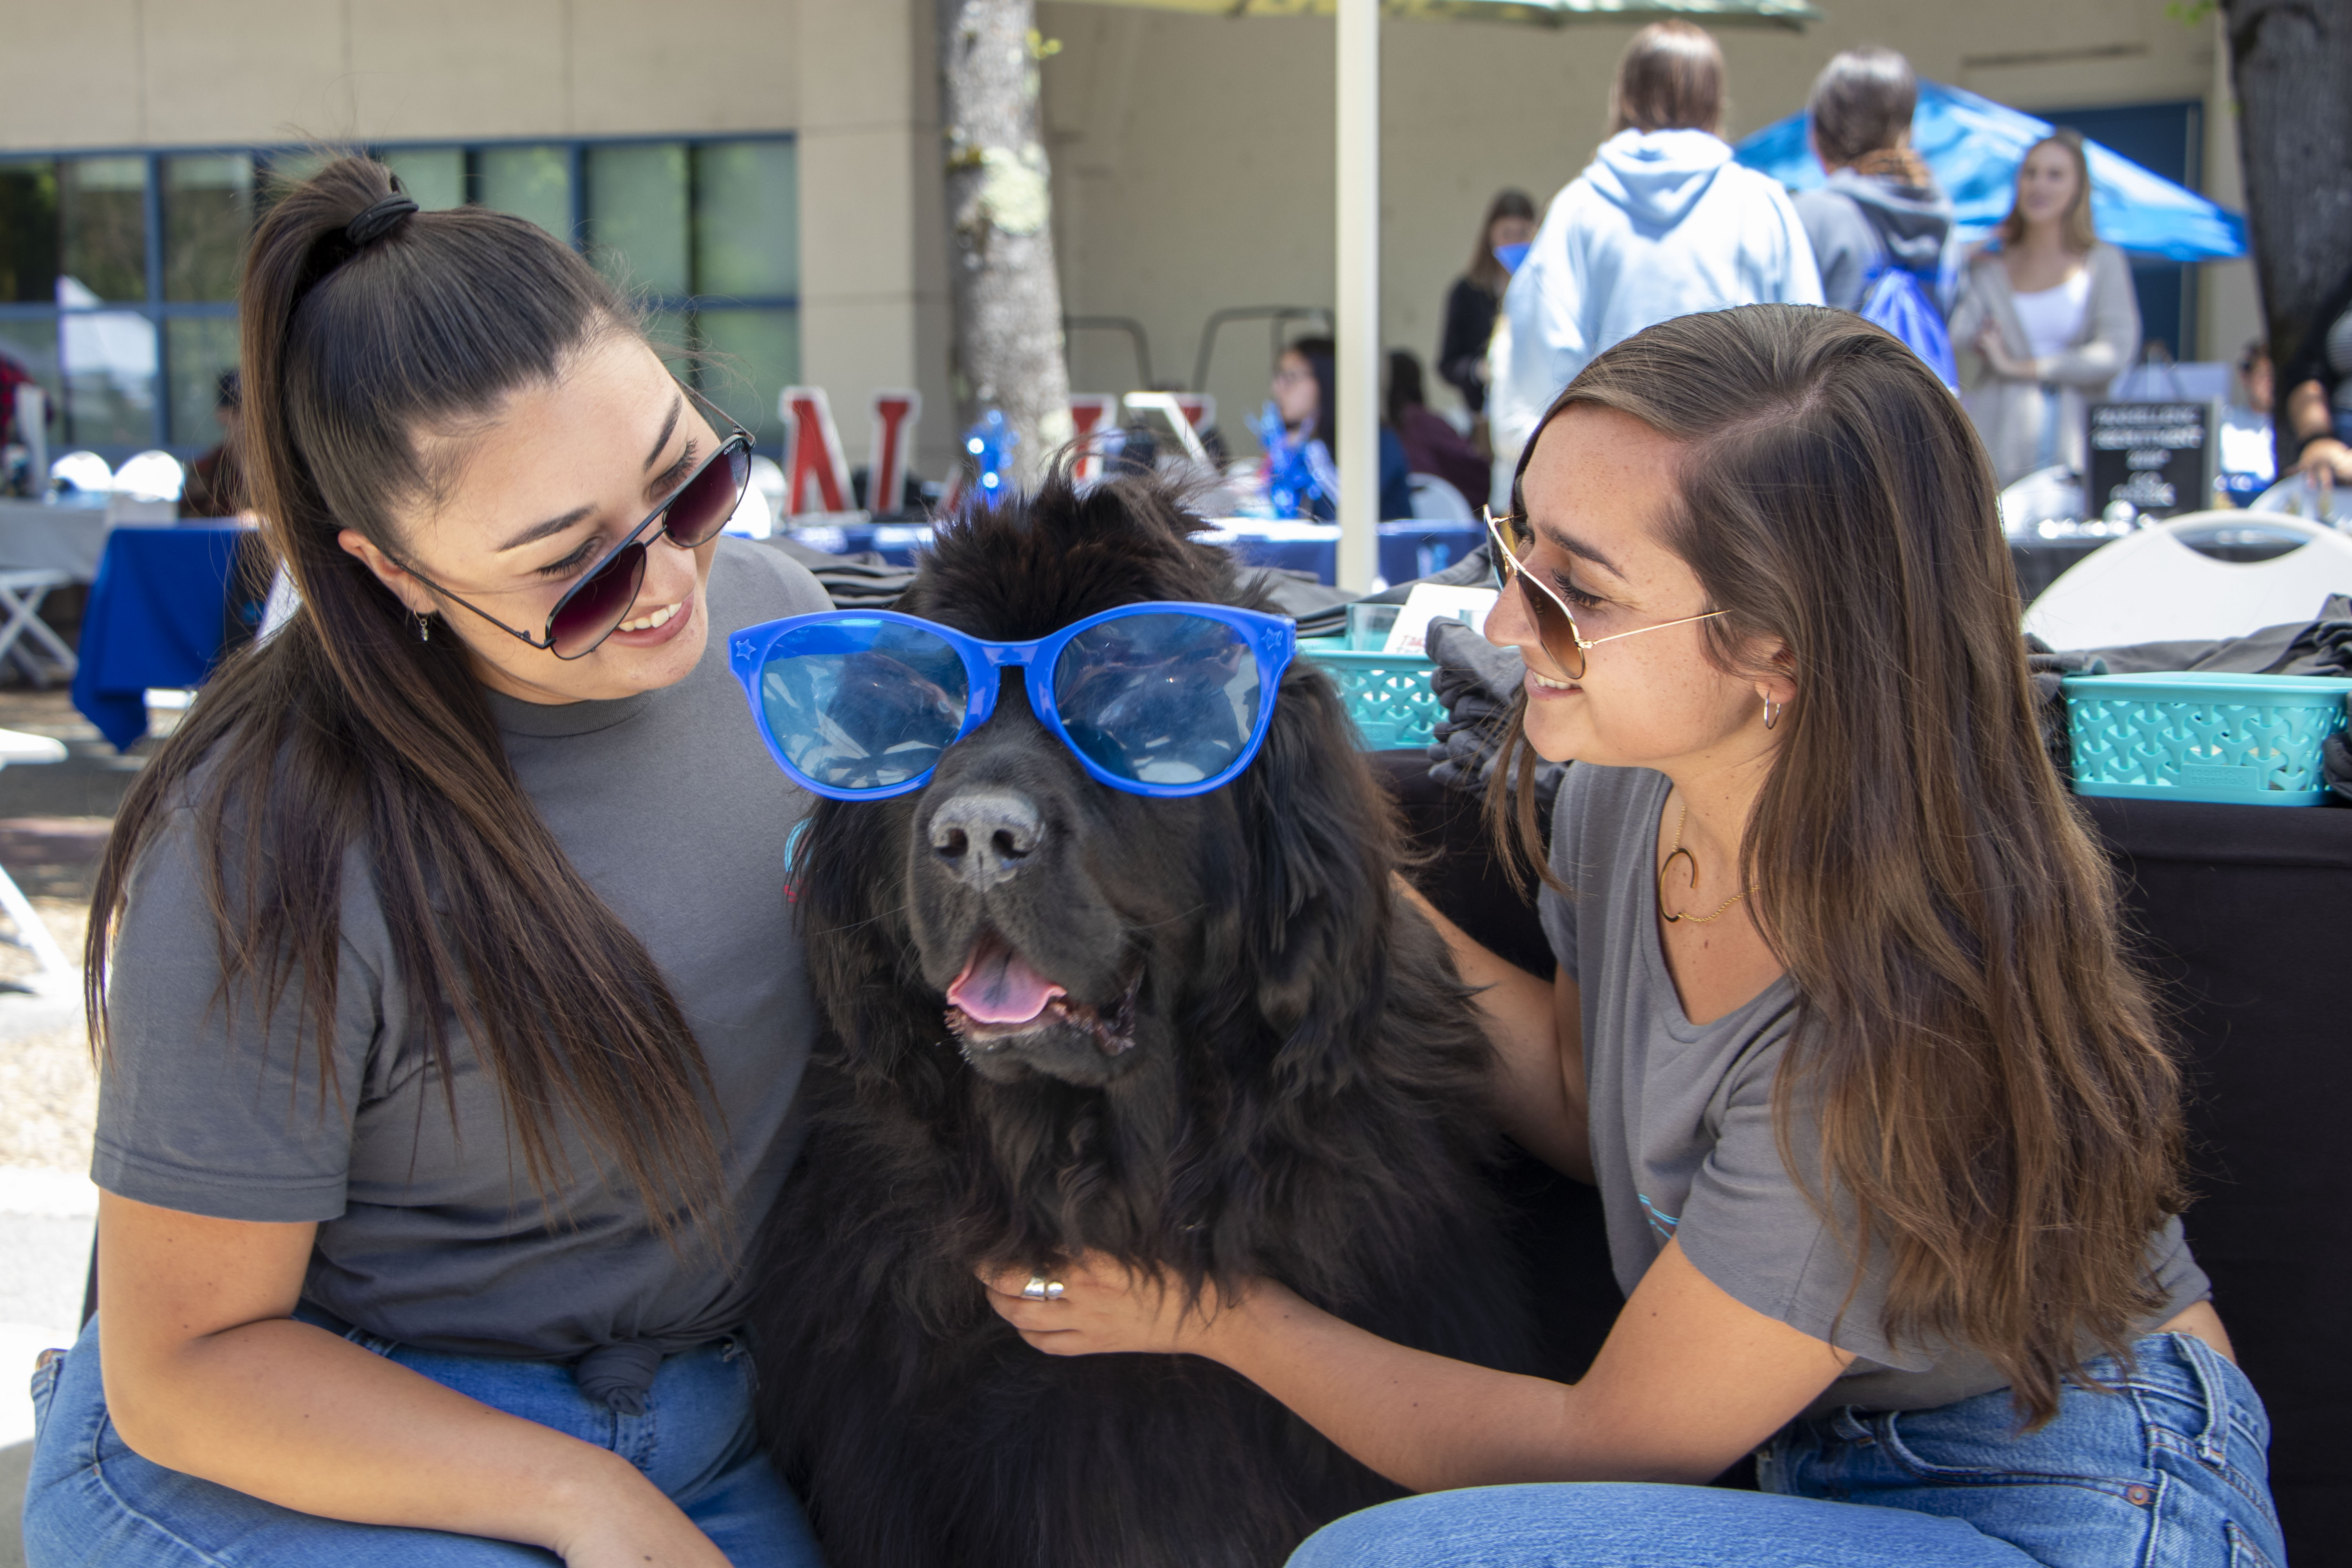 Bismarck the dog poses with two students